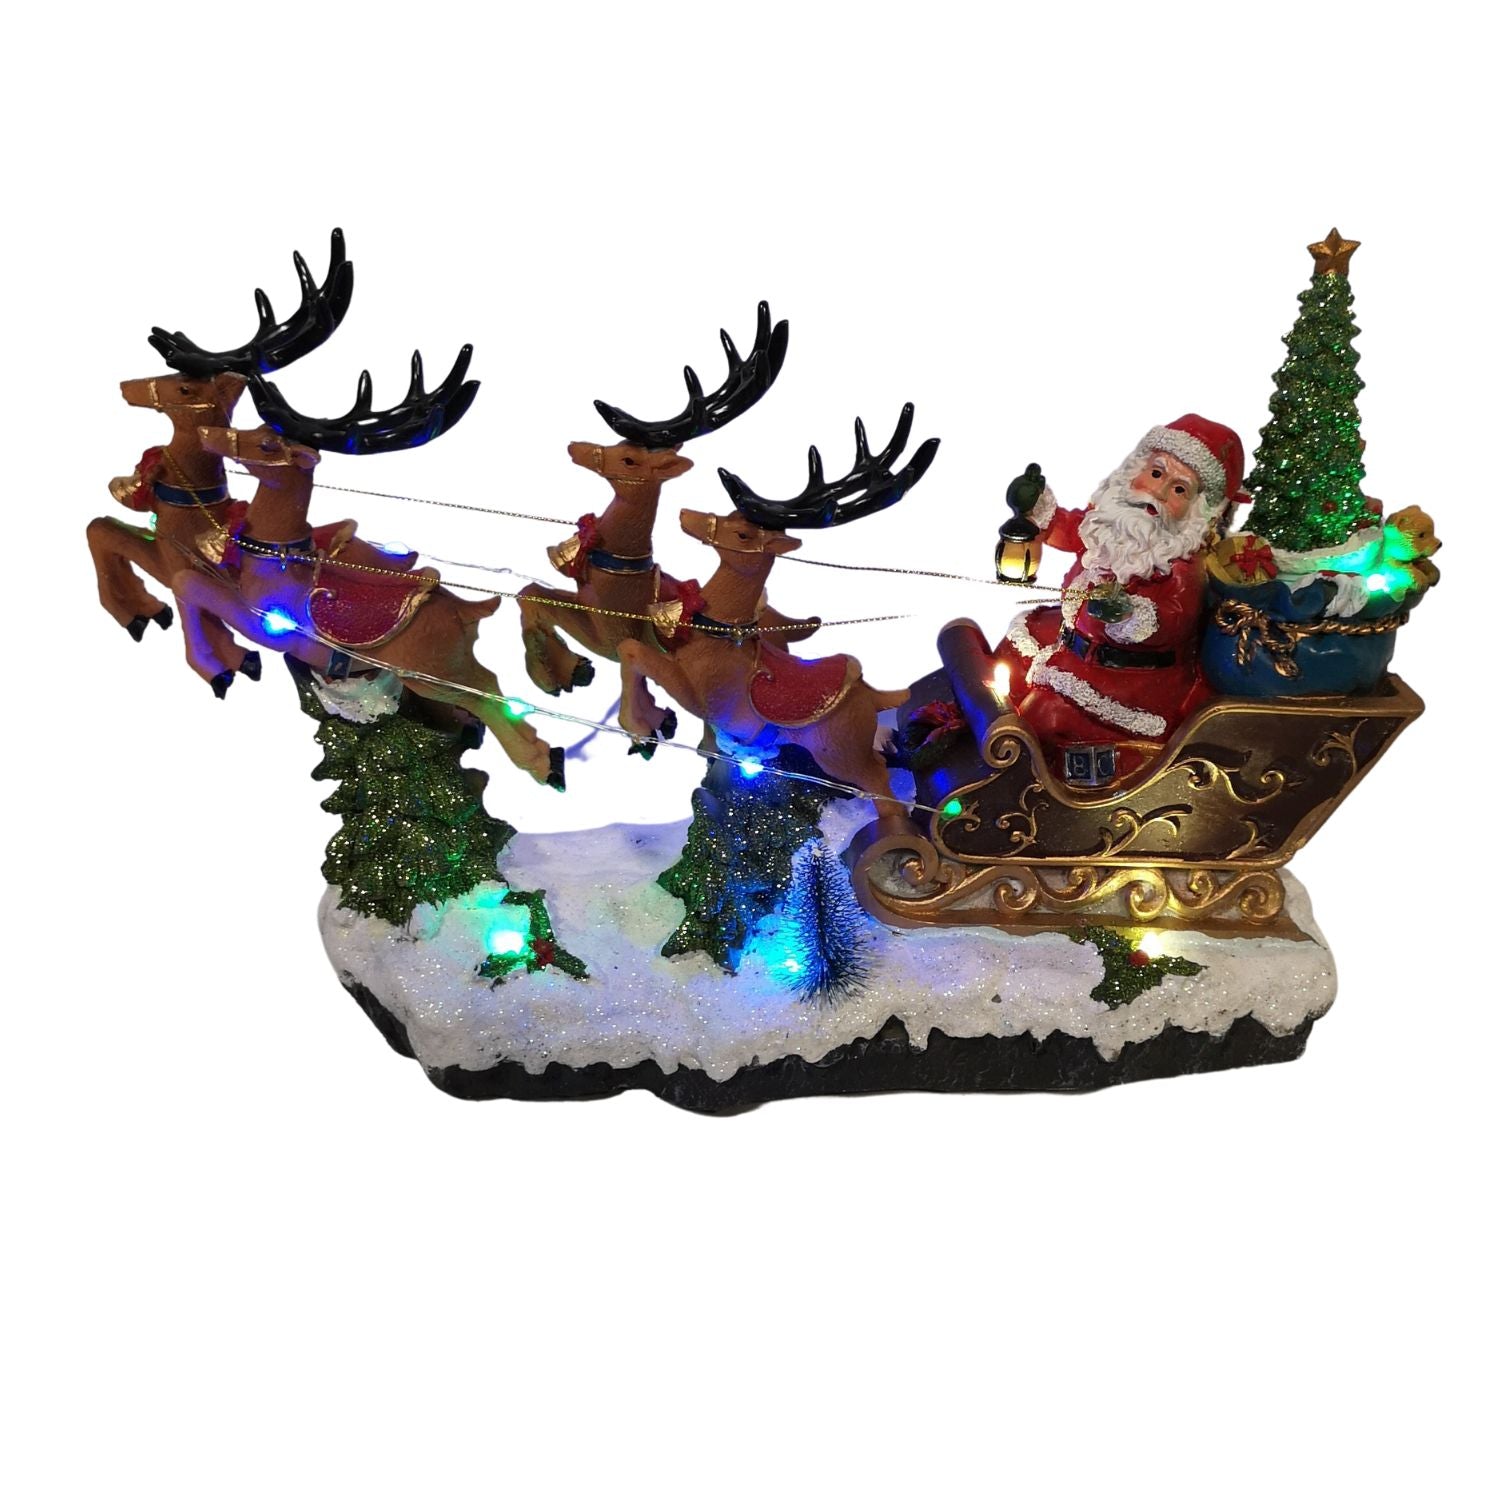 35cm Battery Operated LED Musical Santa Riding Sleigh with Turning Tree Christmas Decoration